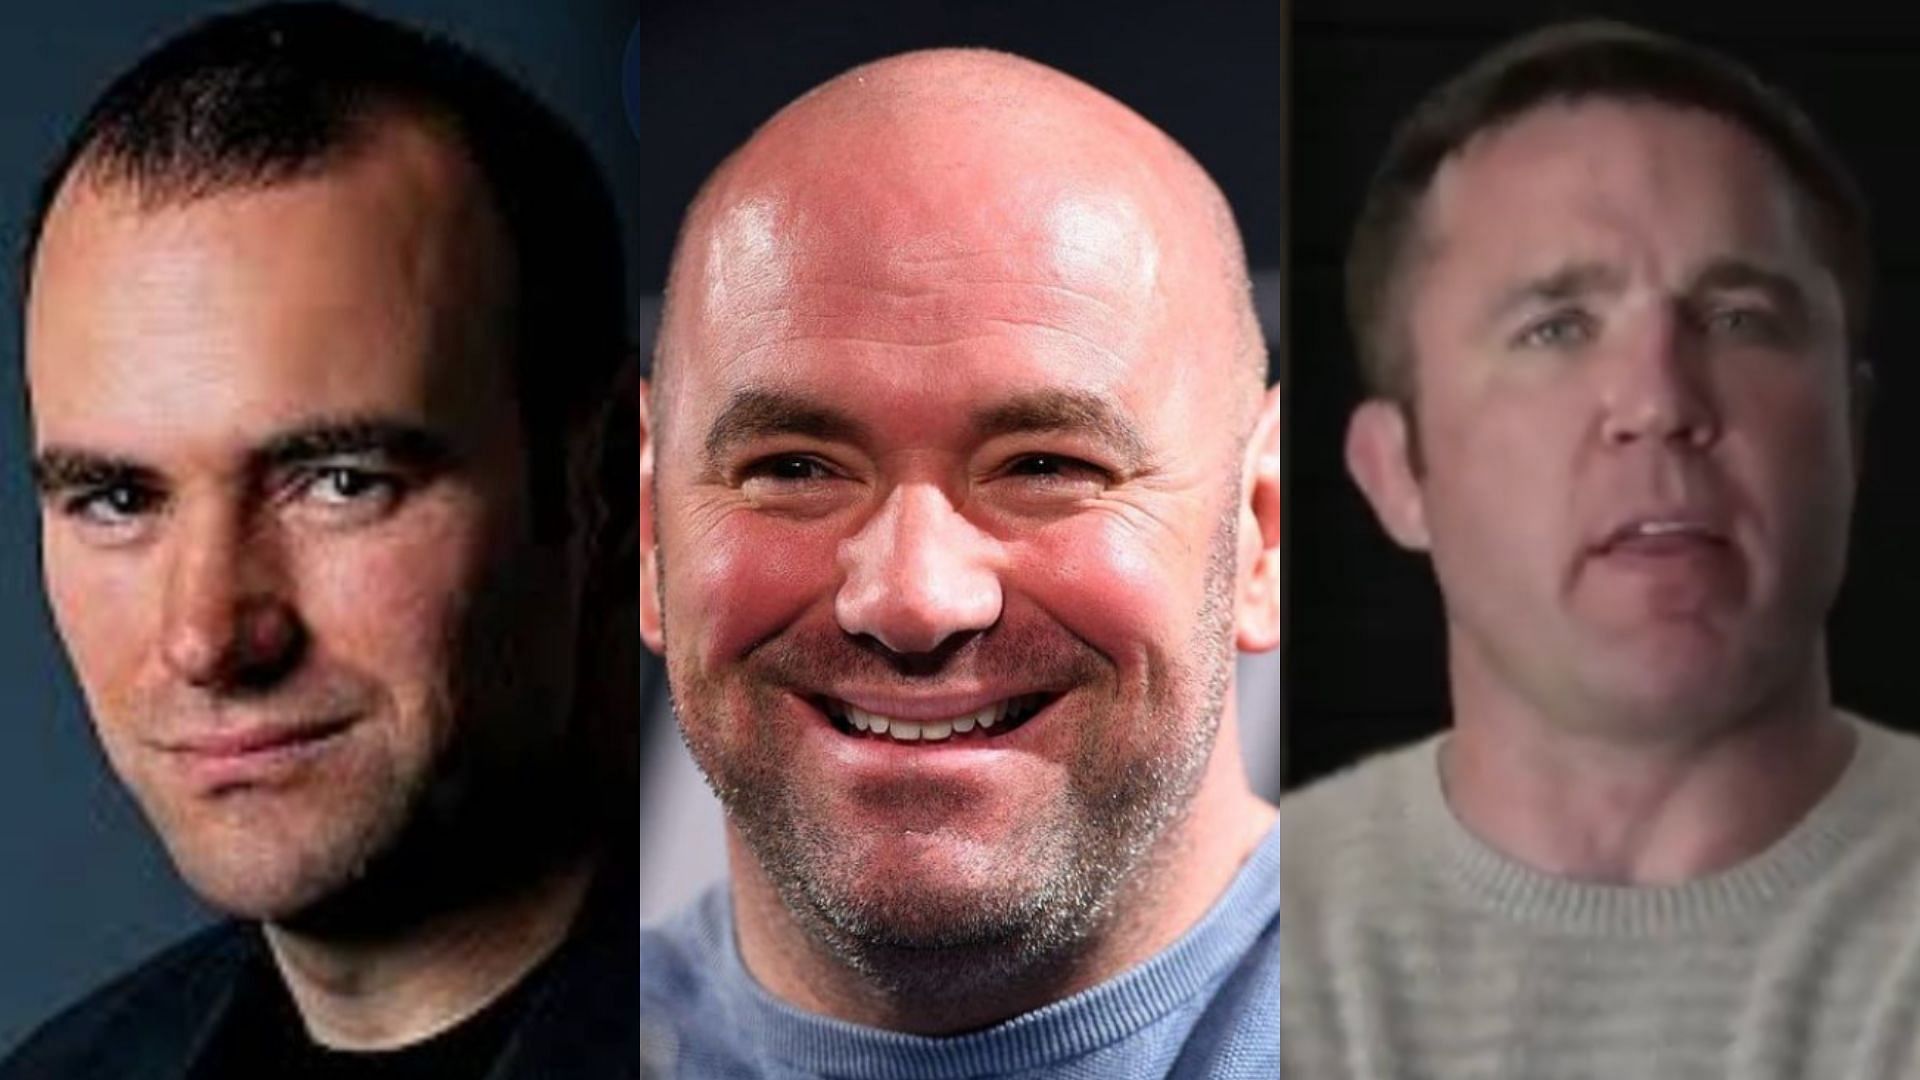 Dana White (left and center), Chael Sonnen (right) [Images Courtesy: @wermma, @fightsportitaliaofficial, and @sonnench on Instagram]